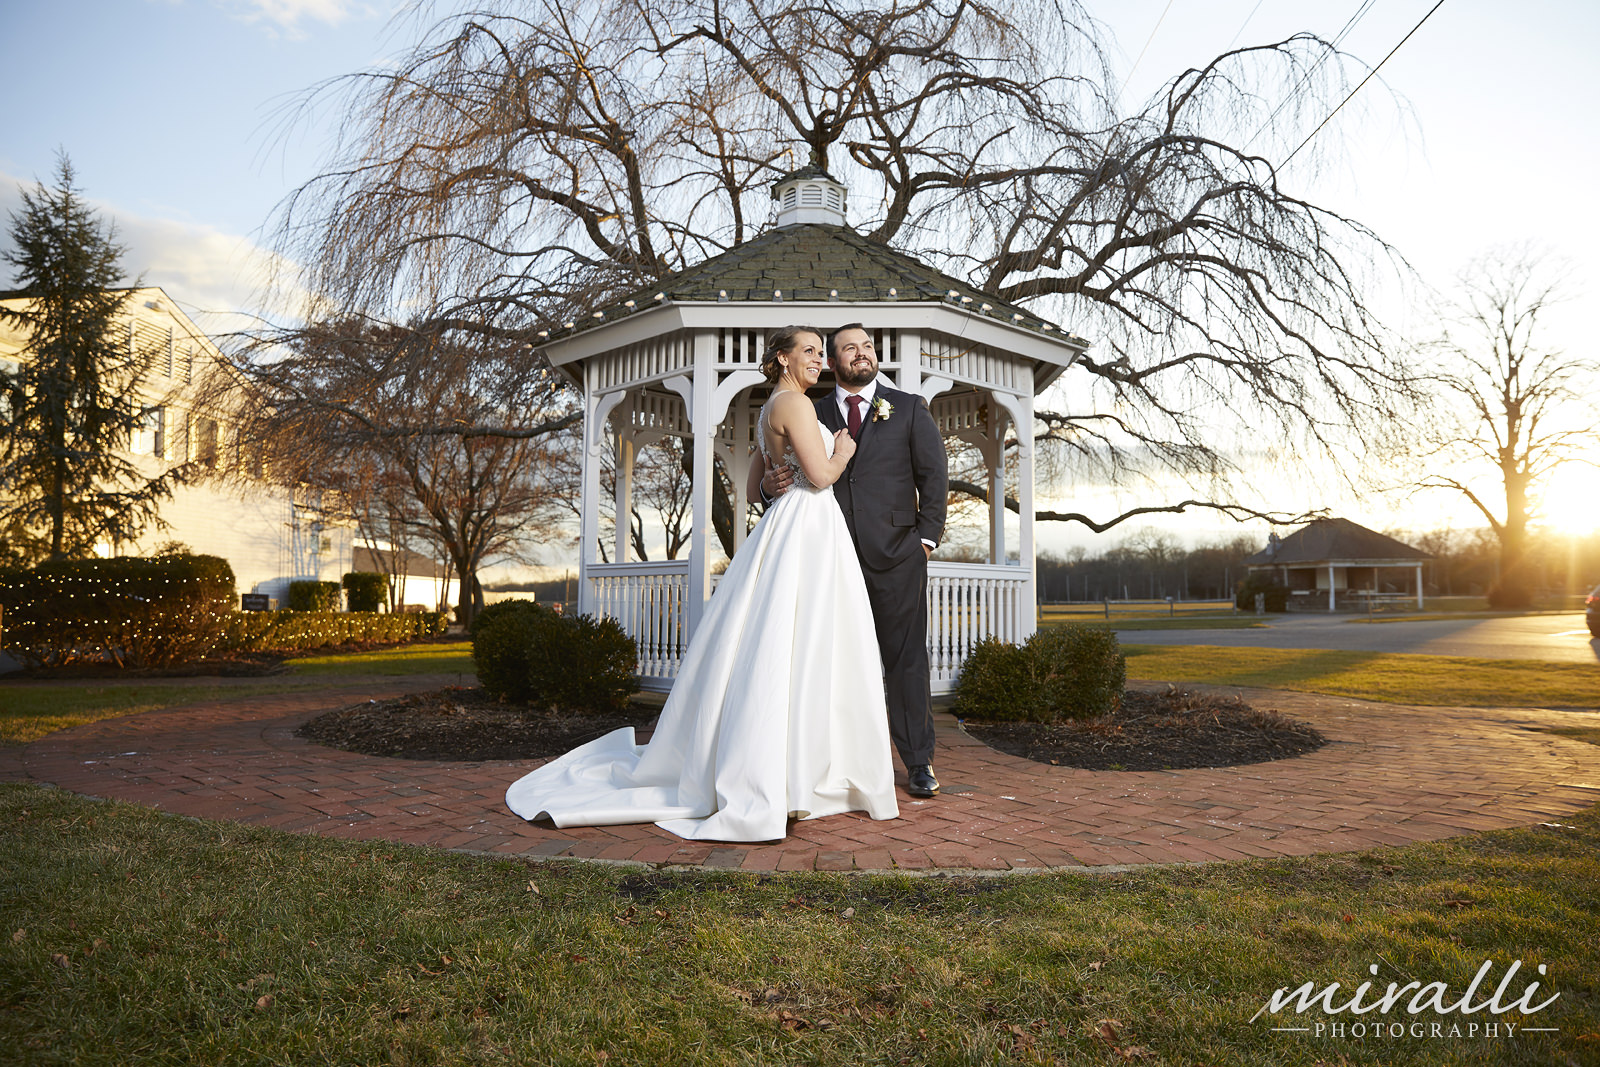 Mansion at Timber Point Wedding Photos by Miralli Photography